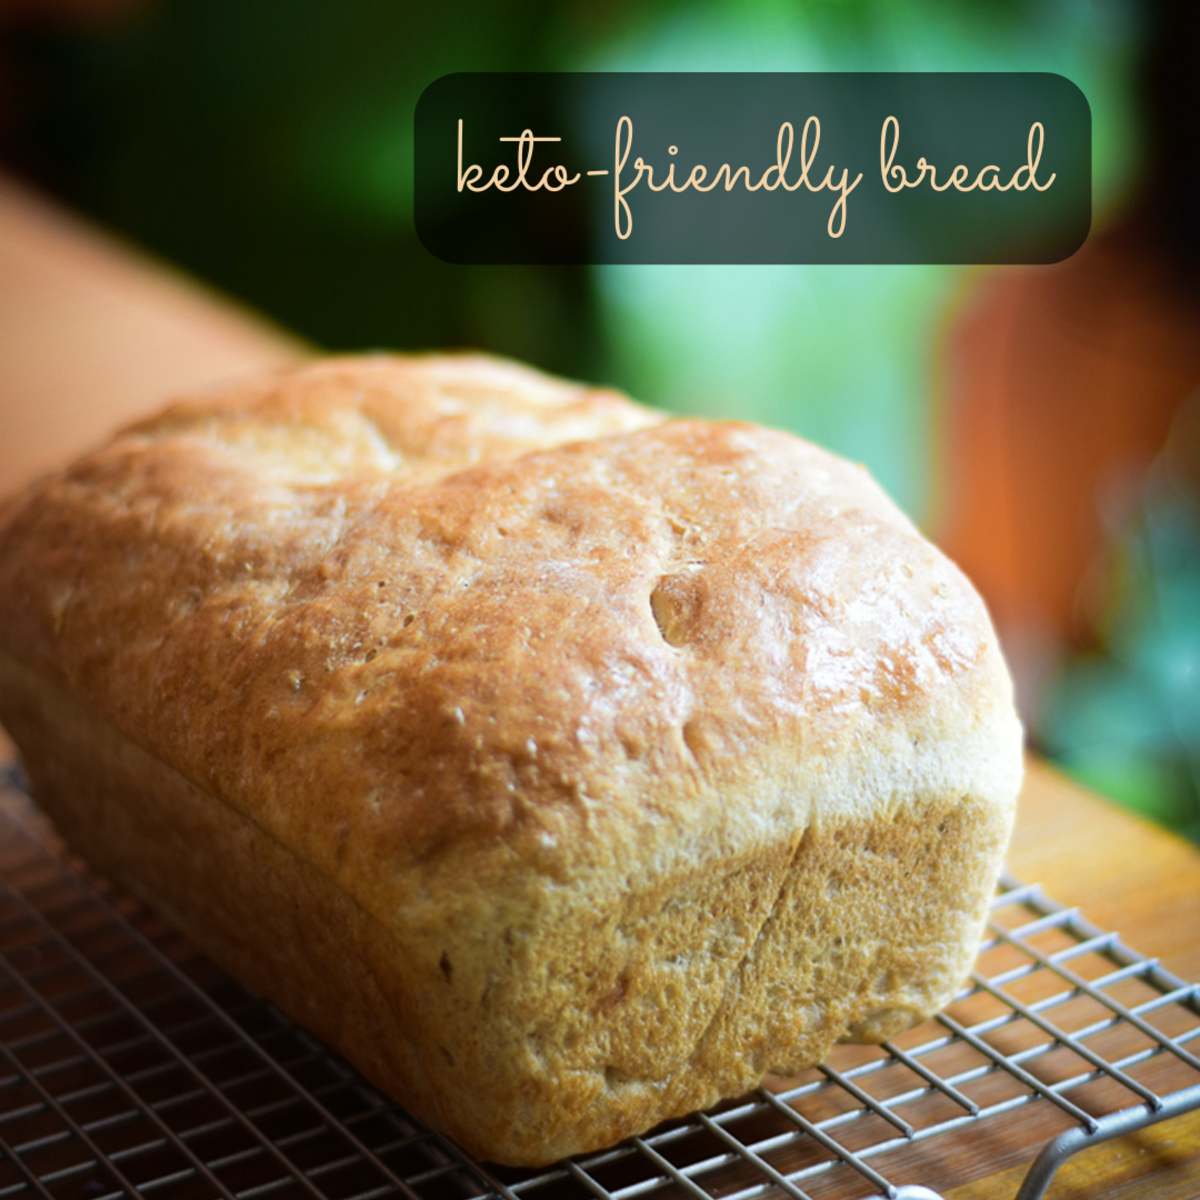 Bread is normally off-limits in the keto diet, but not if you follow these recipes!